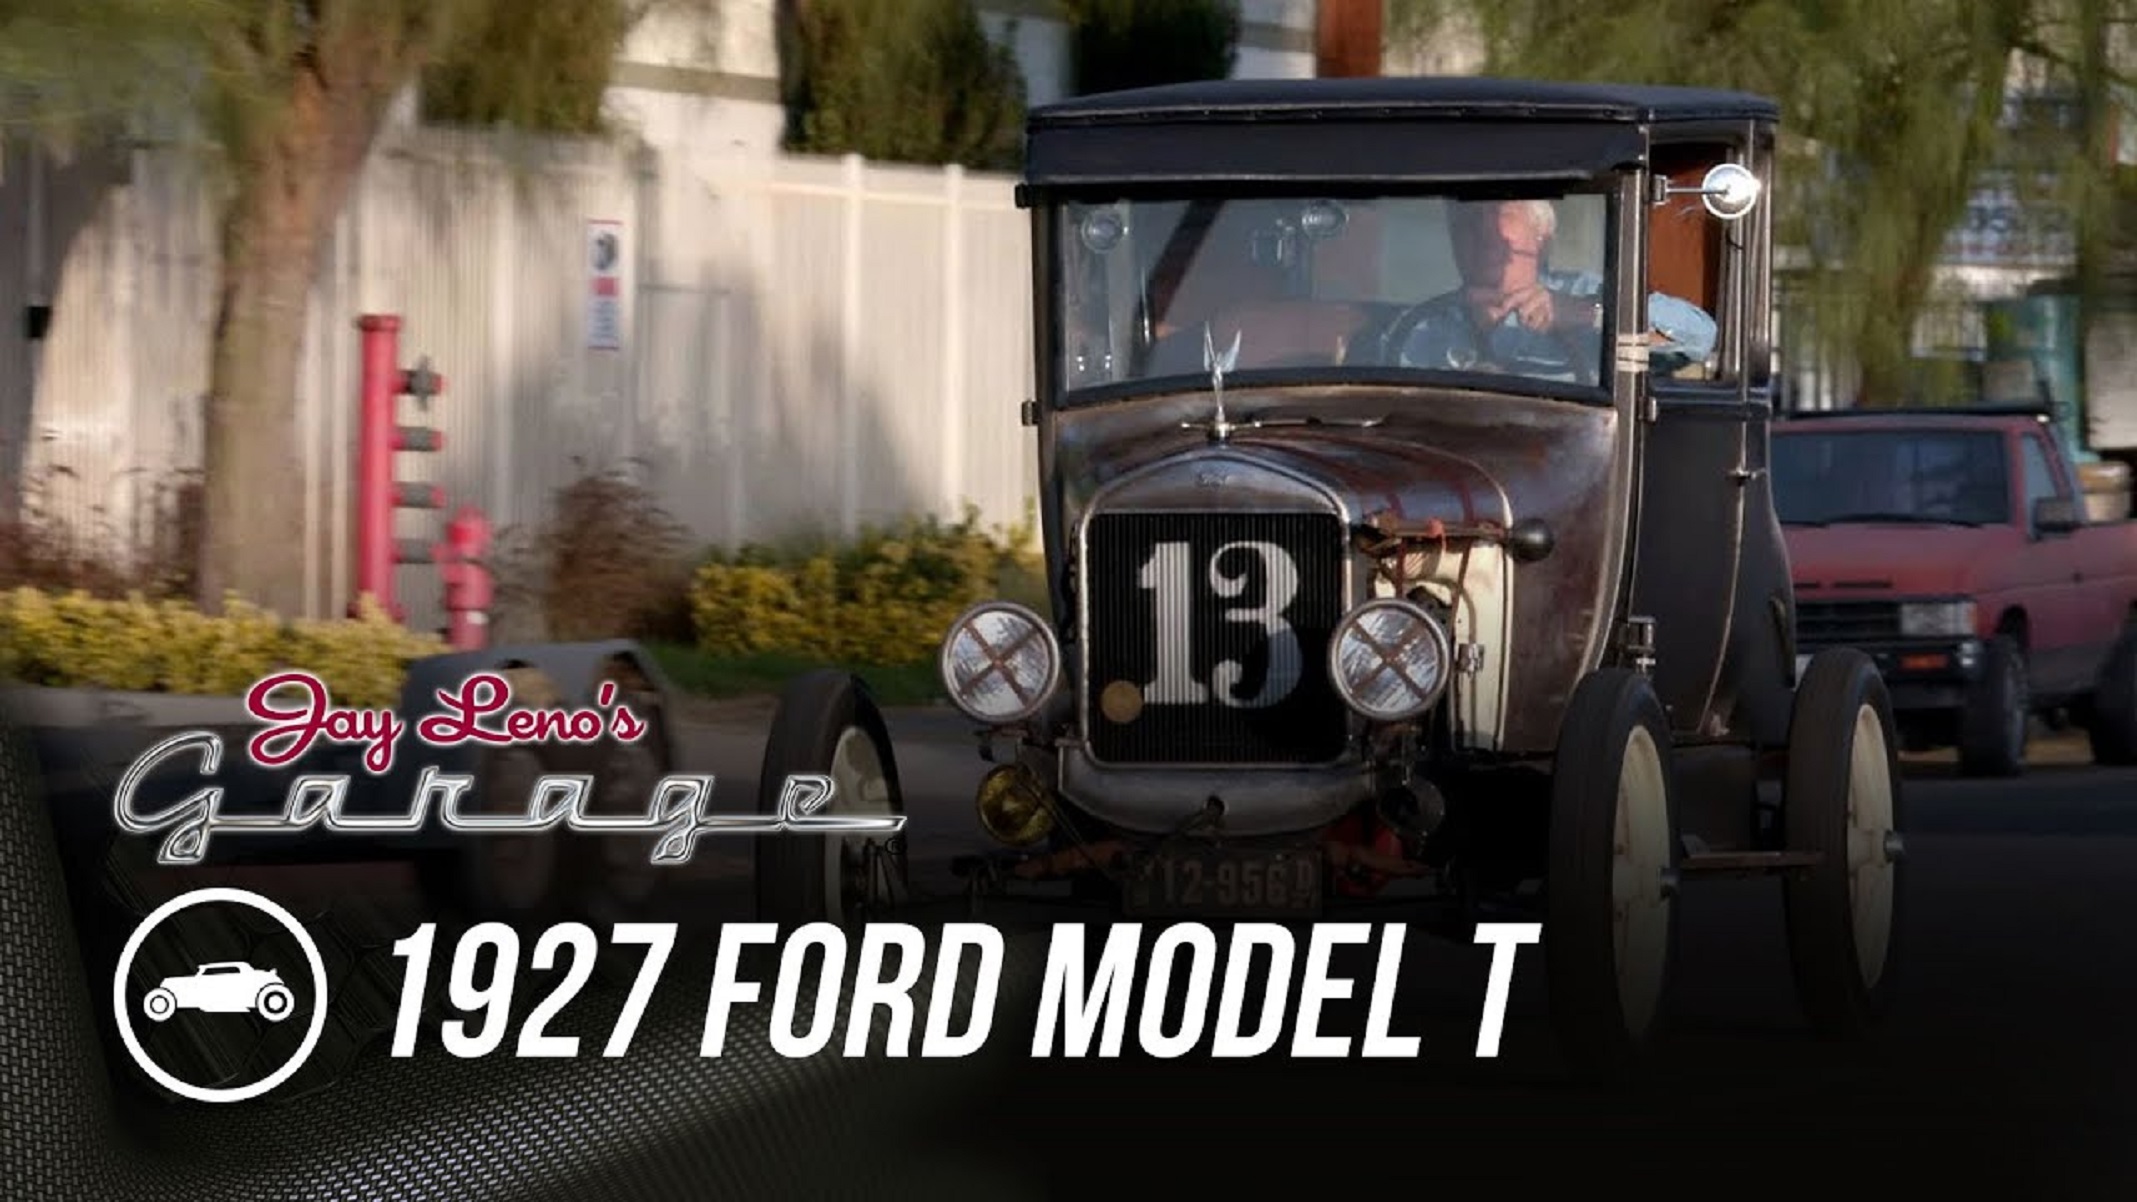 Jay Leno driving a 1927 Ford Model T